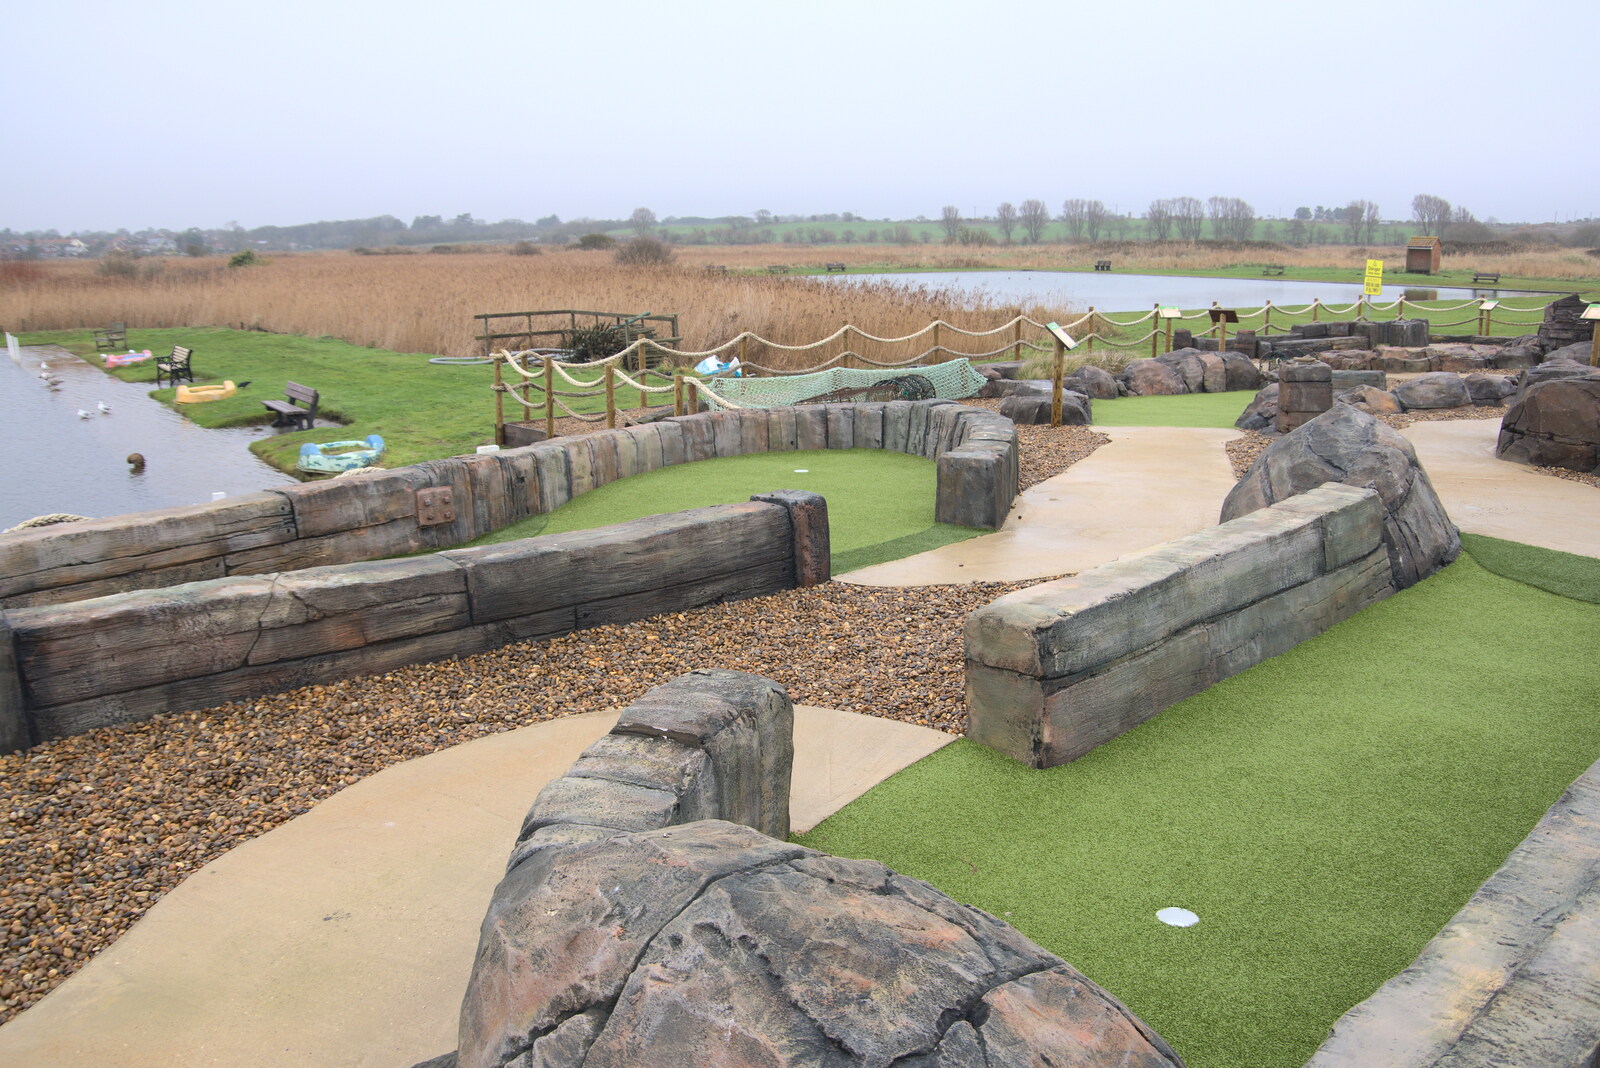 There's a new crazy golf thing down in Southwold from A Few Hours at the Seaside, Southwold, Suffolk - 27th December 2021